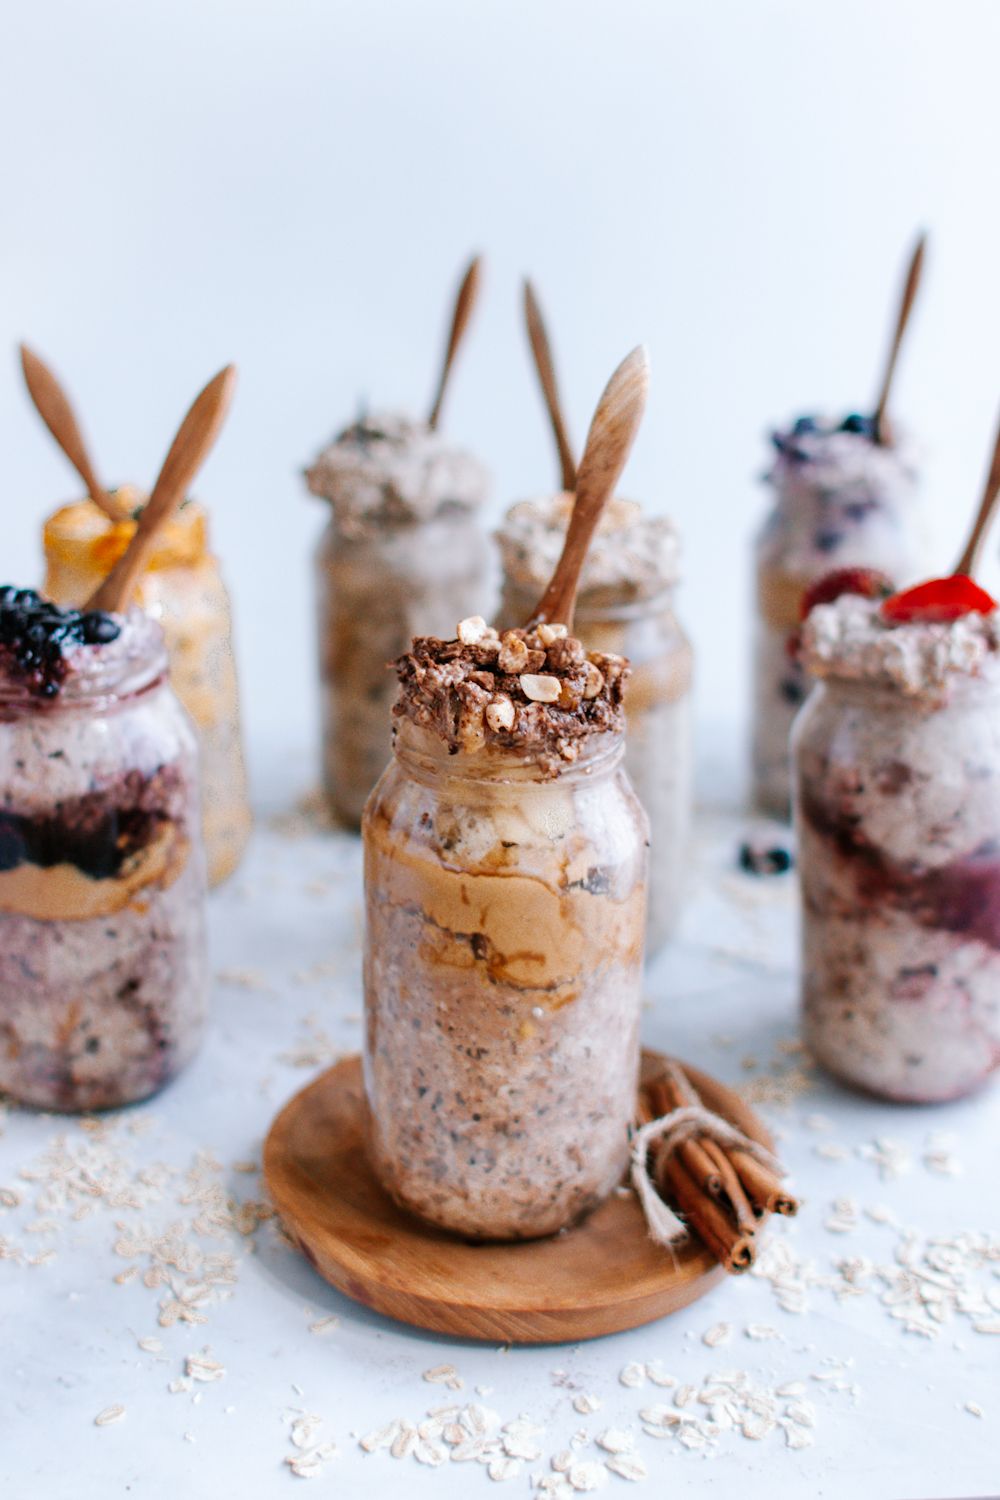 Peanut butter chocolate overnight oats in a glass jar with other flavors in the background.